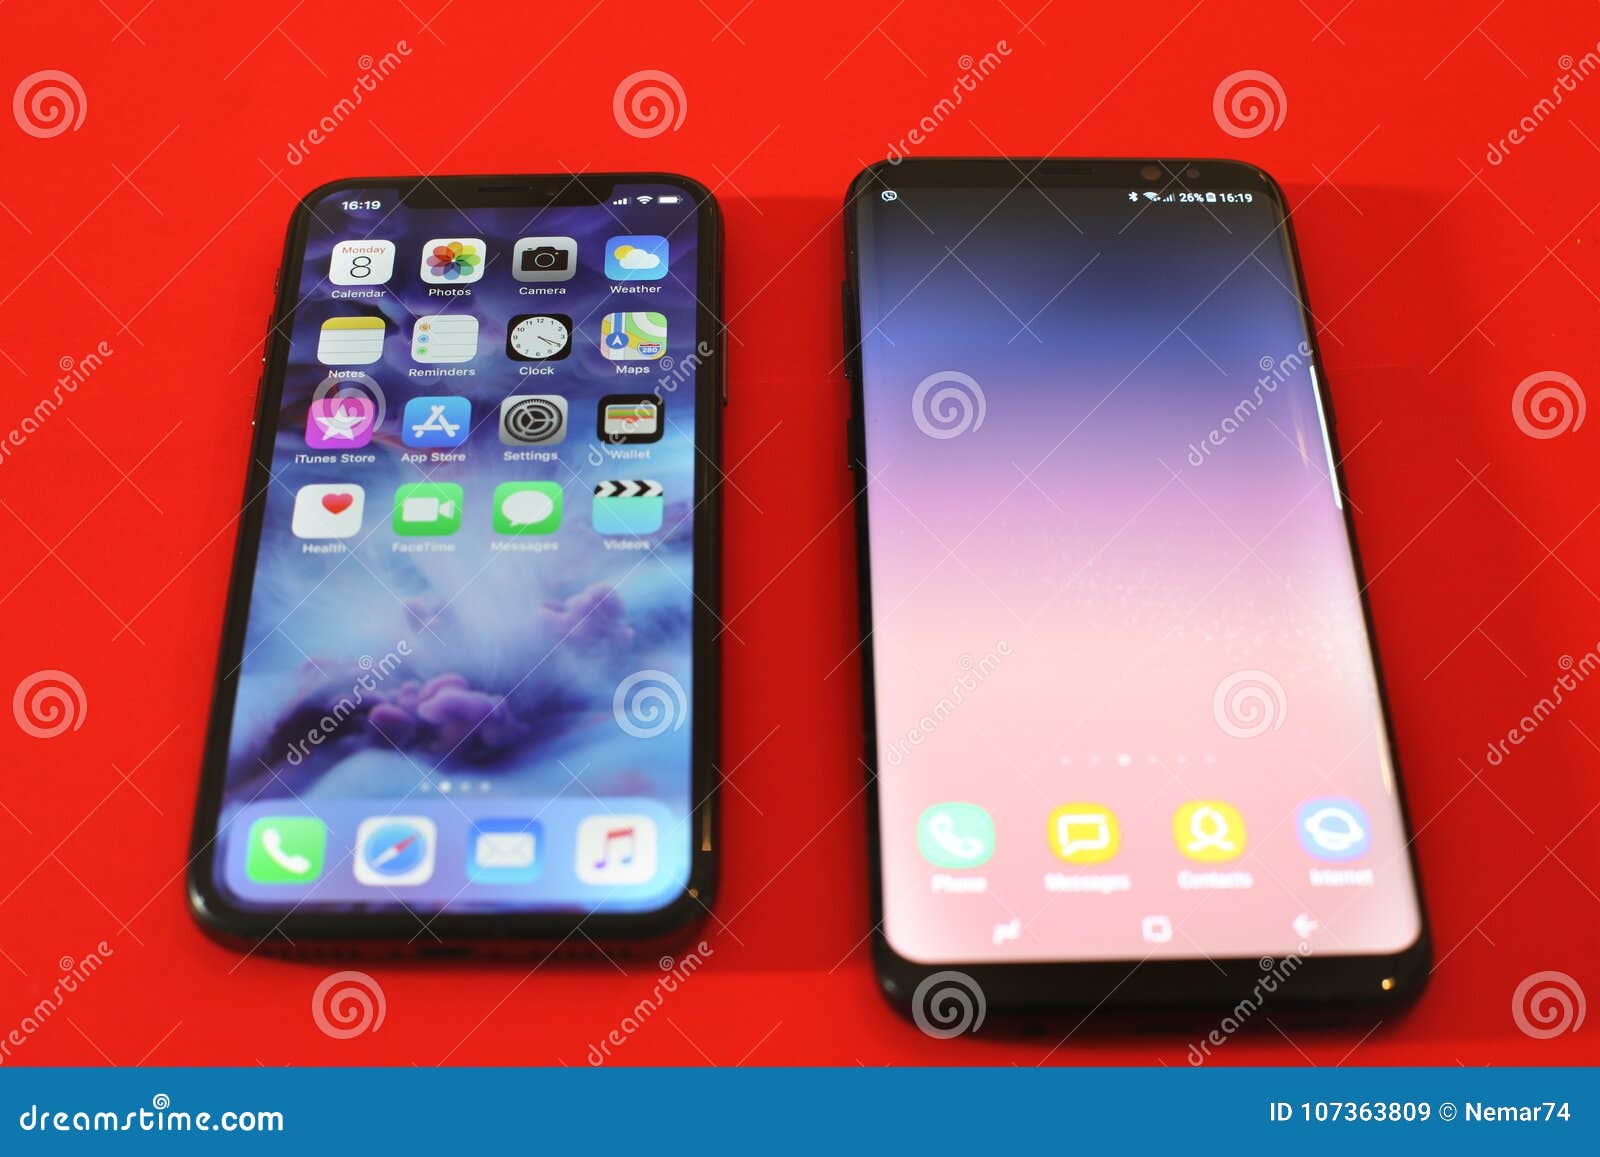 New Samsung S8 Plus An Iphone X Comparasion Editorial Stock Image Image Of Apple Mobile